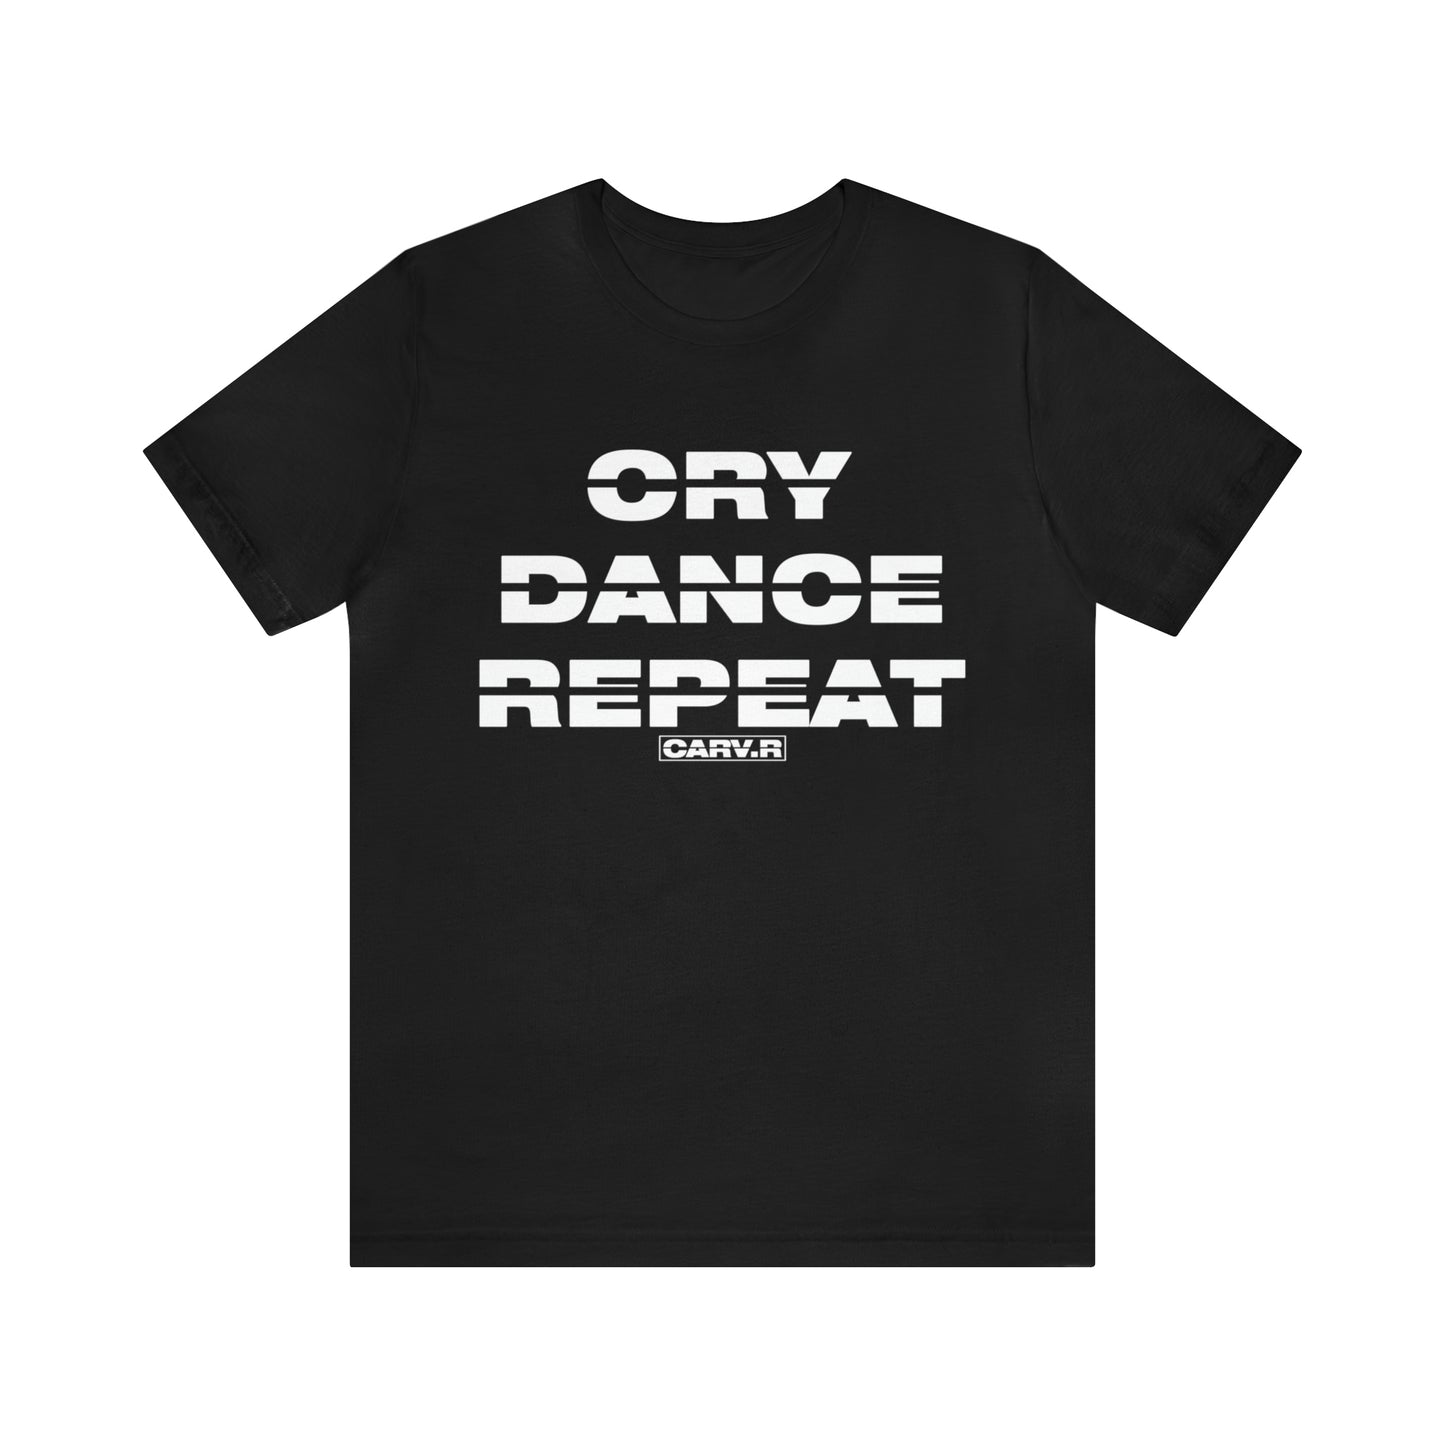 "Cry Dance Repeat" Black, White, Pink & Red T-Shirt